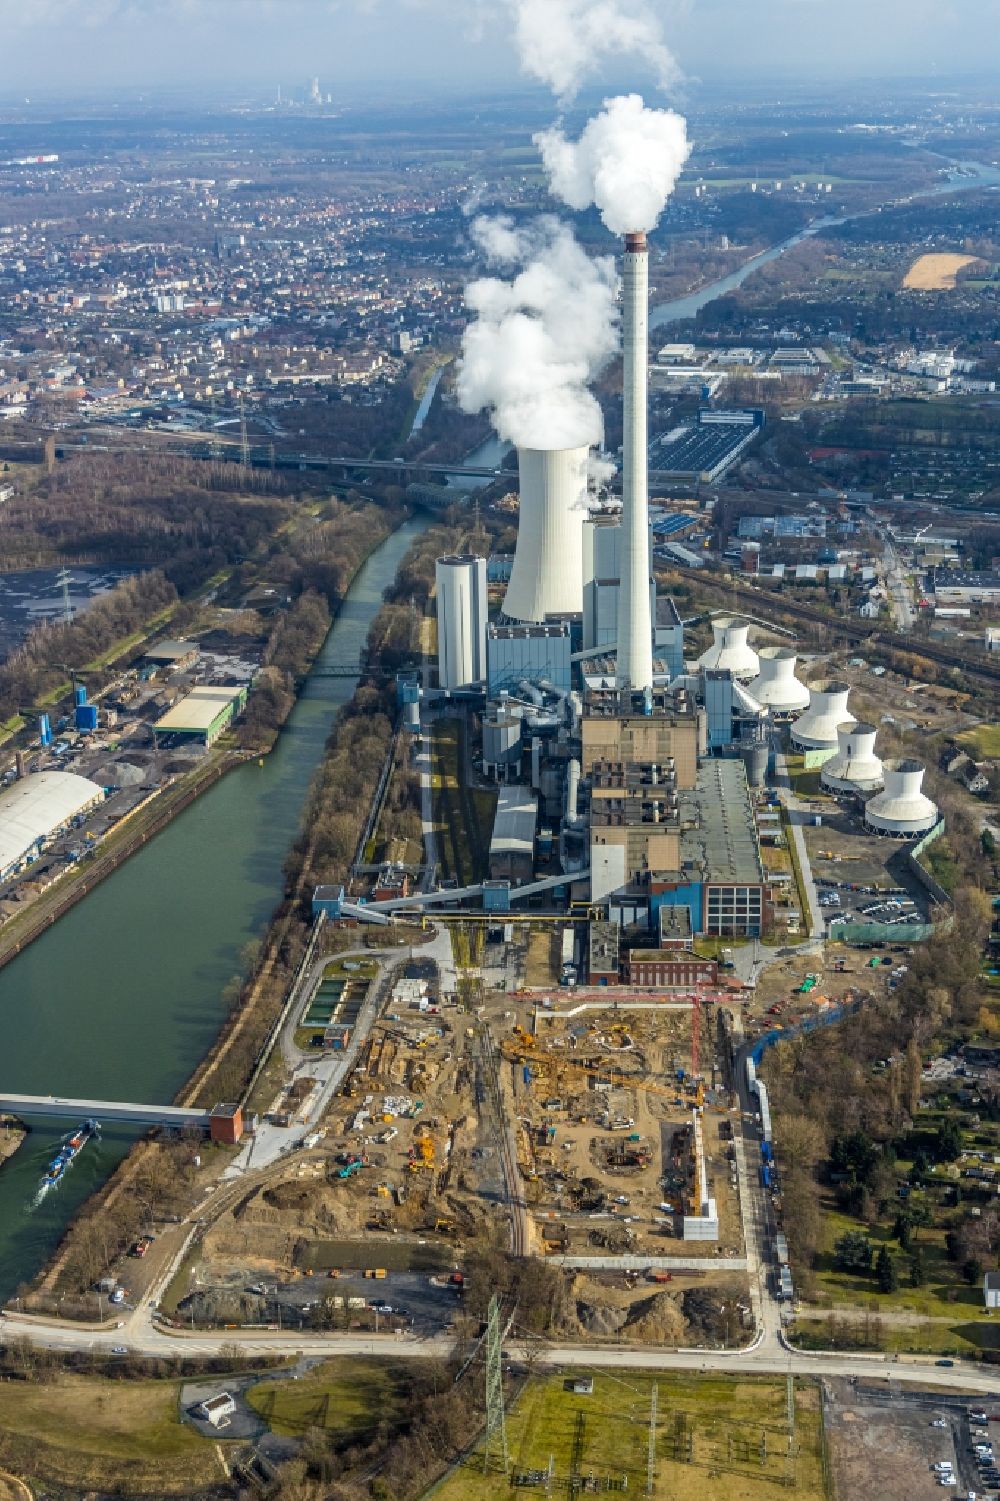 Herne from above - Construction site for the new construction of the power plants of a gas and steam power plant of STEAG GmbH in Herne in the federal state of North Rhine-Westphalia, Germany